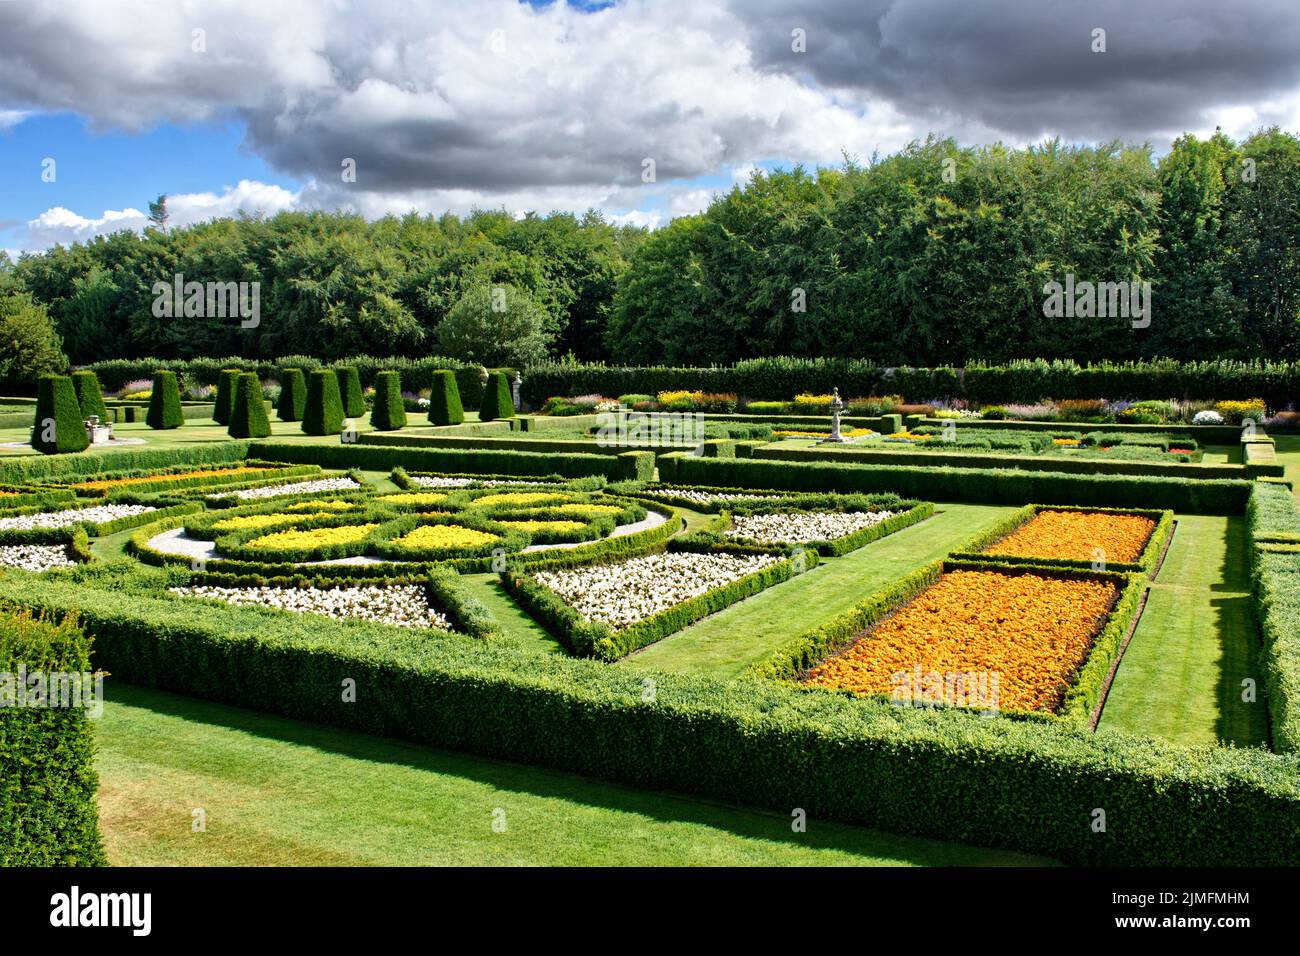 PITMEDDEN GARDEN ABERDEENSHIRE SCOTLAND IN SUMMER VIEW OVER THE PARTERRES AND HERBACEOUS BORDERS OF THE LOWER GARDEN Stock Photo